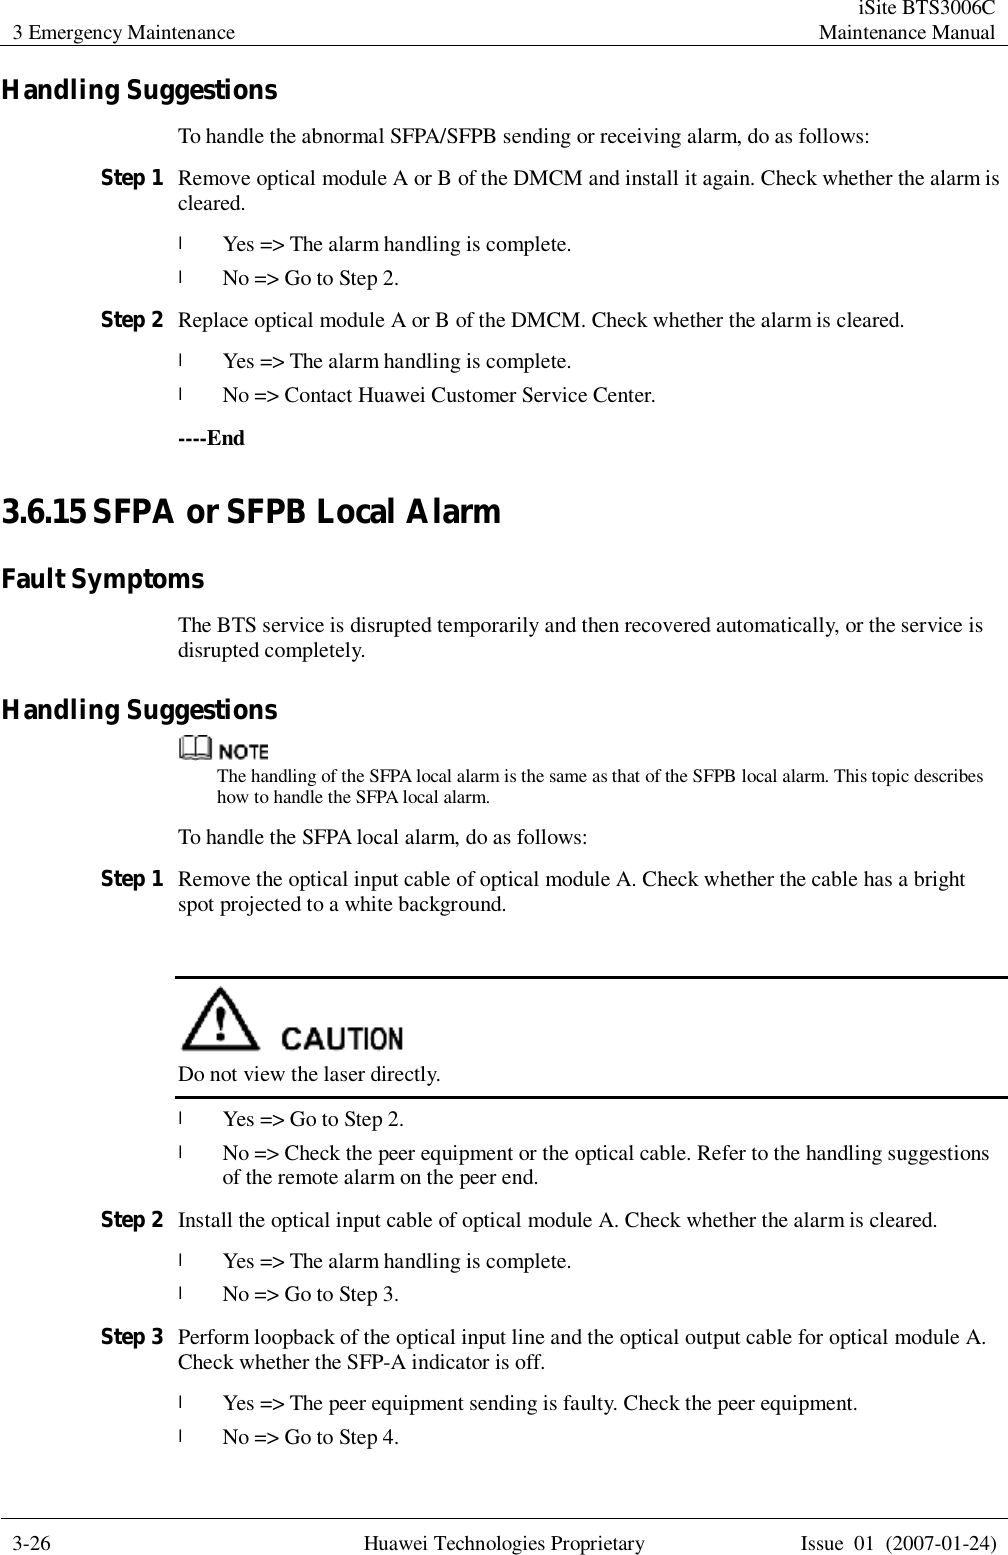 3 Emergency Maintenance  iSite BTS3006C Maintenance Manual  3-26 Huawei Technologies Proprietary Issue 01 (2007-01-24)  Handling Suggestions To handle the abnormal SFPA/SFPB sending or receiving alarm, do as follows: Step 1 Remove optical module A or B of the DMCM and install it again. Check whether the alarm is cleared. l Yes =&gt; The alarm handling is complete.  l No =&gt; Go to Step 2. Step 2 Replace optical module A or B of the DMCM. Check whether the alarm is cleared. l Yes =&gt; The alarm handling is complete.  l No =&gt; Contact Huawei Customer Service Center. ----End 3.6.15 SFPA or SFPB Local Alarm Fault Symptoms The BTS service is disrupted temporarily and then recovered automatically, or the service is disrupted completely. Handling Suggestions  The handling of the SFPA local alarm is the same as that of the SFPB local alarm. This topic describes how to handle the SFPA local alarm. To handle the SFPA local alarm, do as follows: Step 1 Remove the optical input cable of optical module A. Check whether the cable has a bright spot projected to a white background.   Do not view the laser directly. l Yes =&gt; Go to Step 2. l No =&gt; Check the peer equipment or the optical cable. Refer to the handling suggestions of the remote alarm on the peer end.   Step 2 Install the optical input cable of optical module A. Check whether the alarm is cleared. l Yes =&gt; The alarm handling is complete. l No =&gt; Go to Step 3. Step 3 Perform loopback of the optical input line and the optical output cable for optical module A. Check whether the SFP-A indicator is off. l Yes =&gt; The peer equipment sending is faulty. Check the peer equipment. l No =&gt; Go to Step 4. 